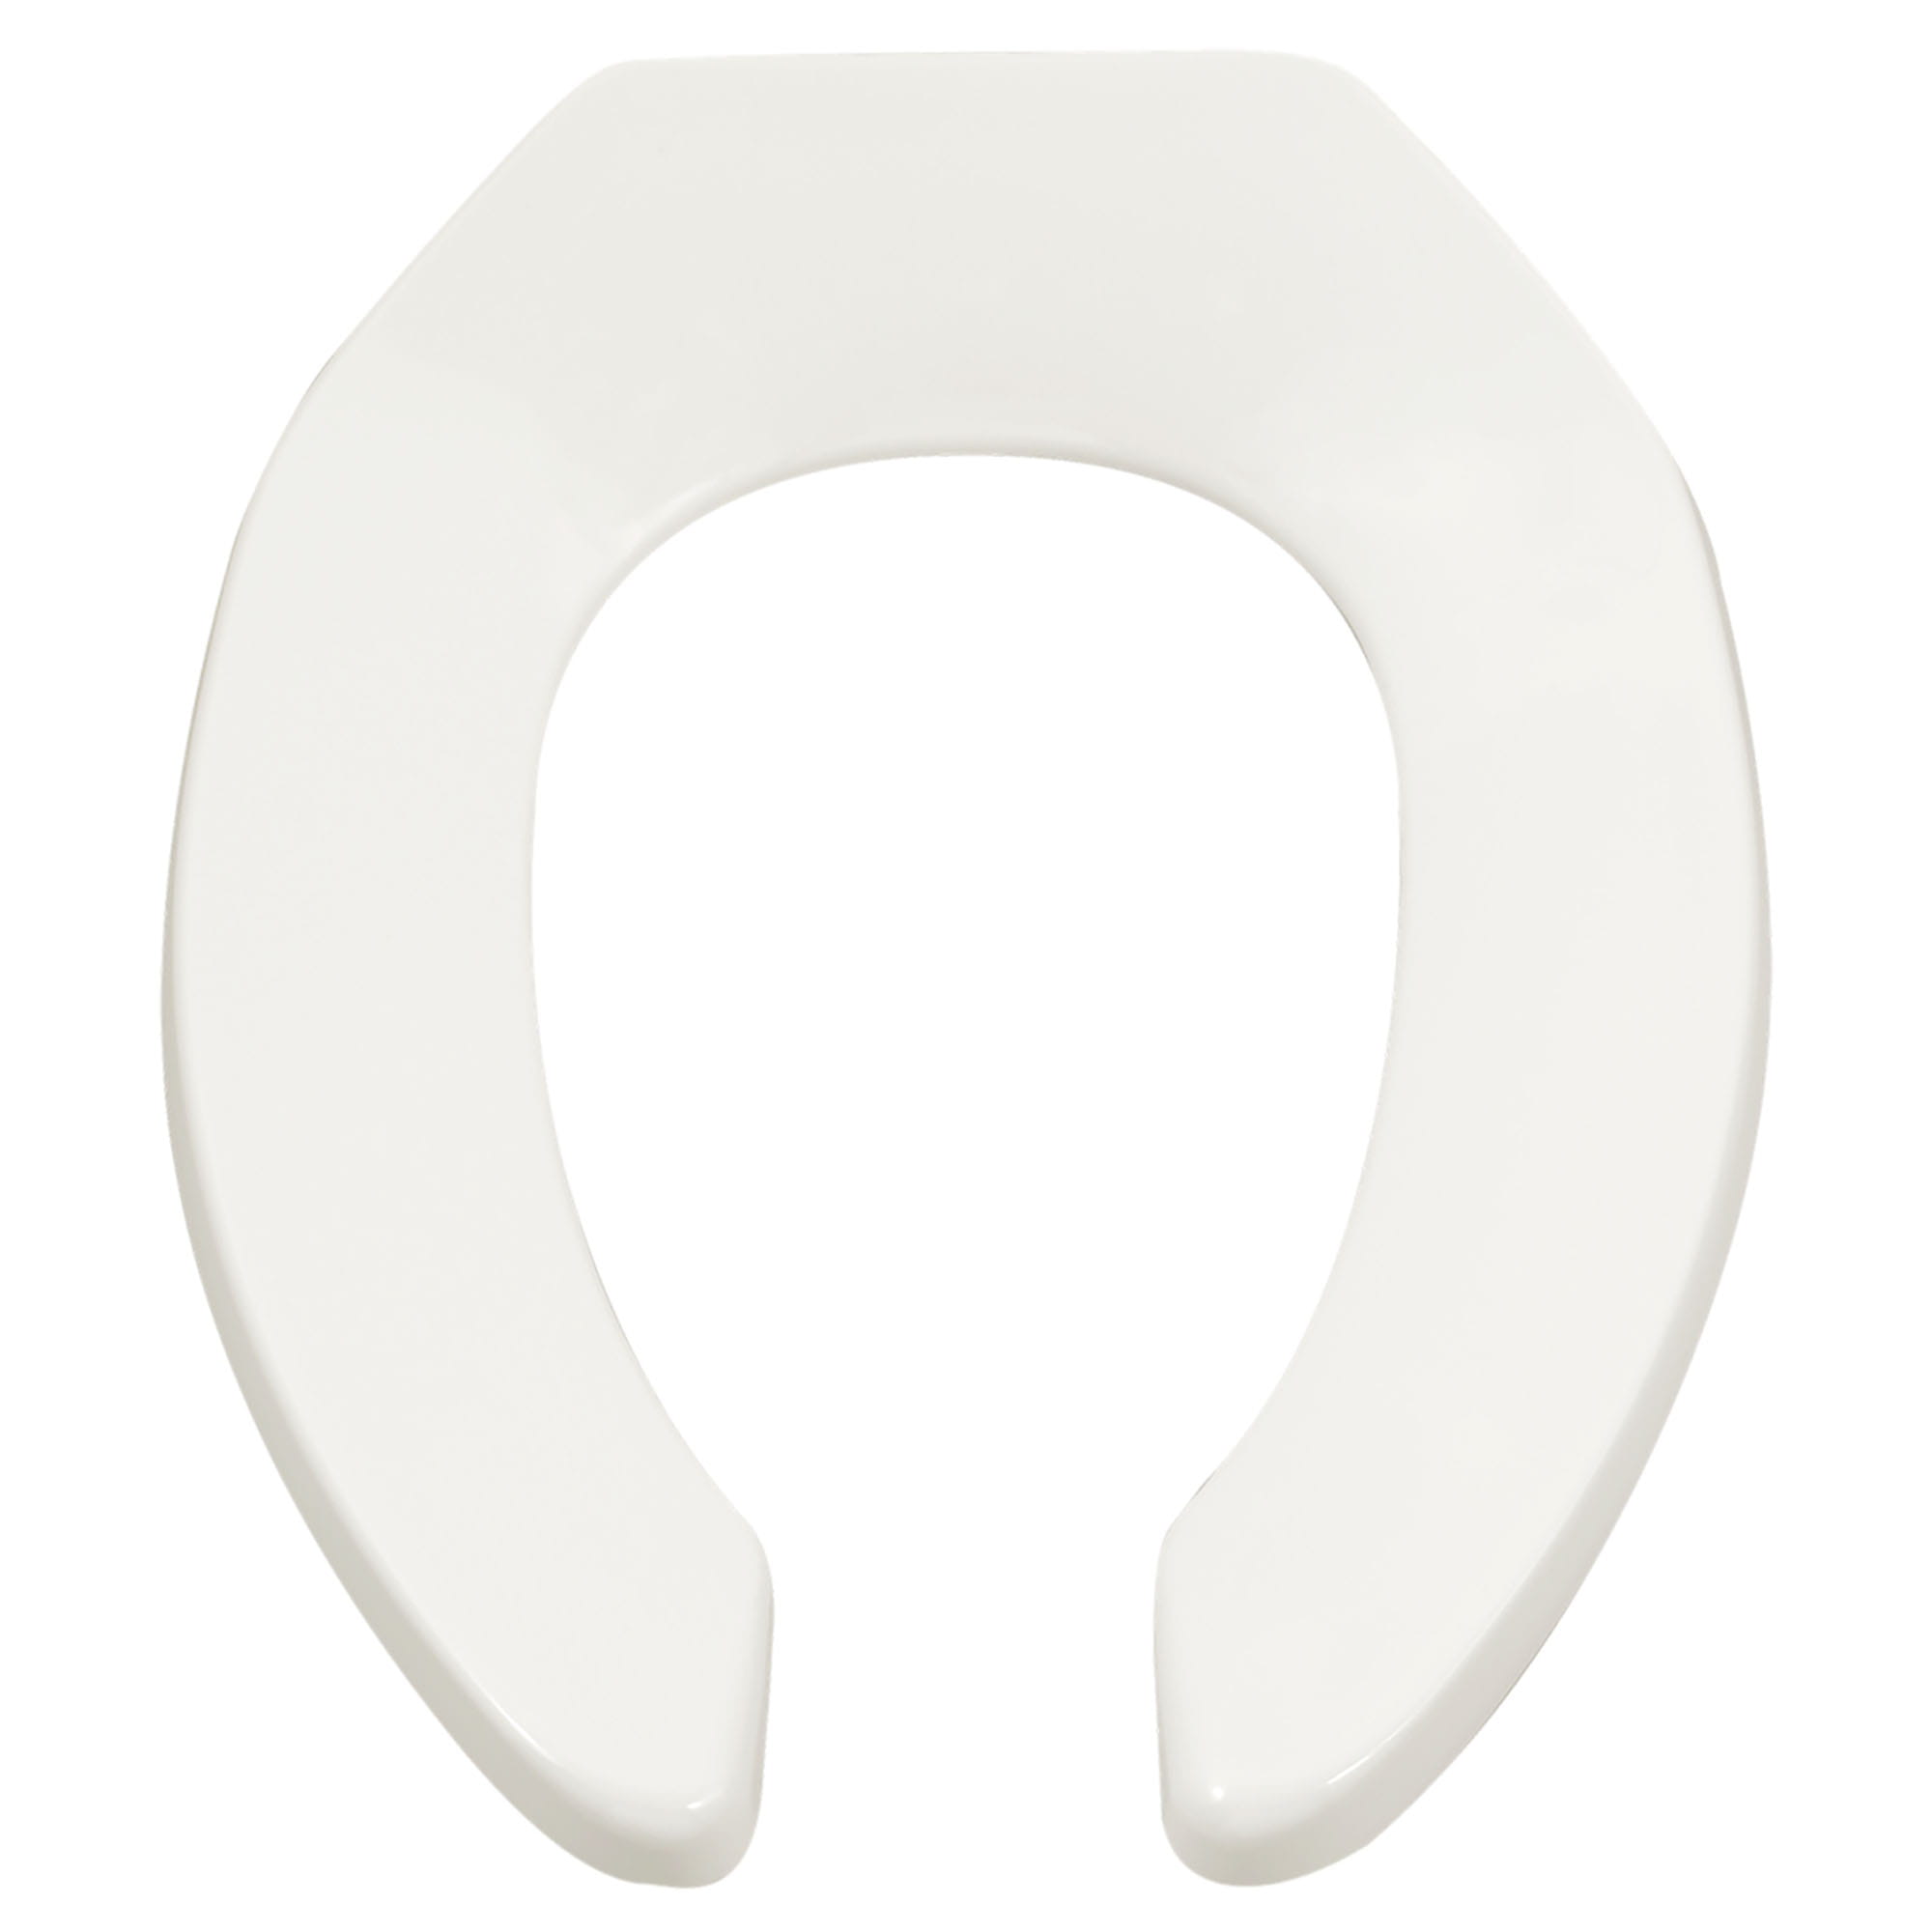 Commercial Heavy Duty Open Front Elongated Toilet Seat with EverClean® Surface and Self-sustaining Hinges